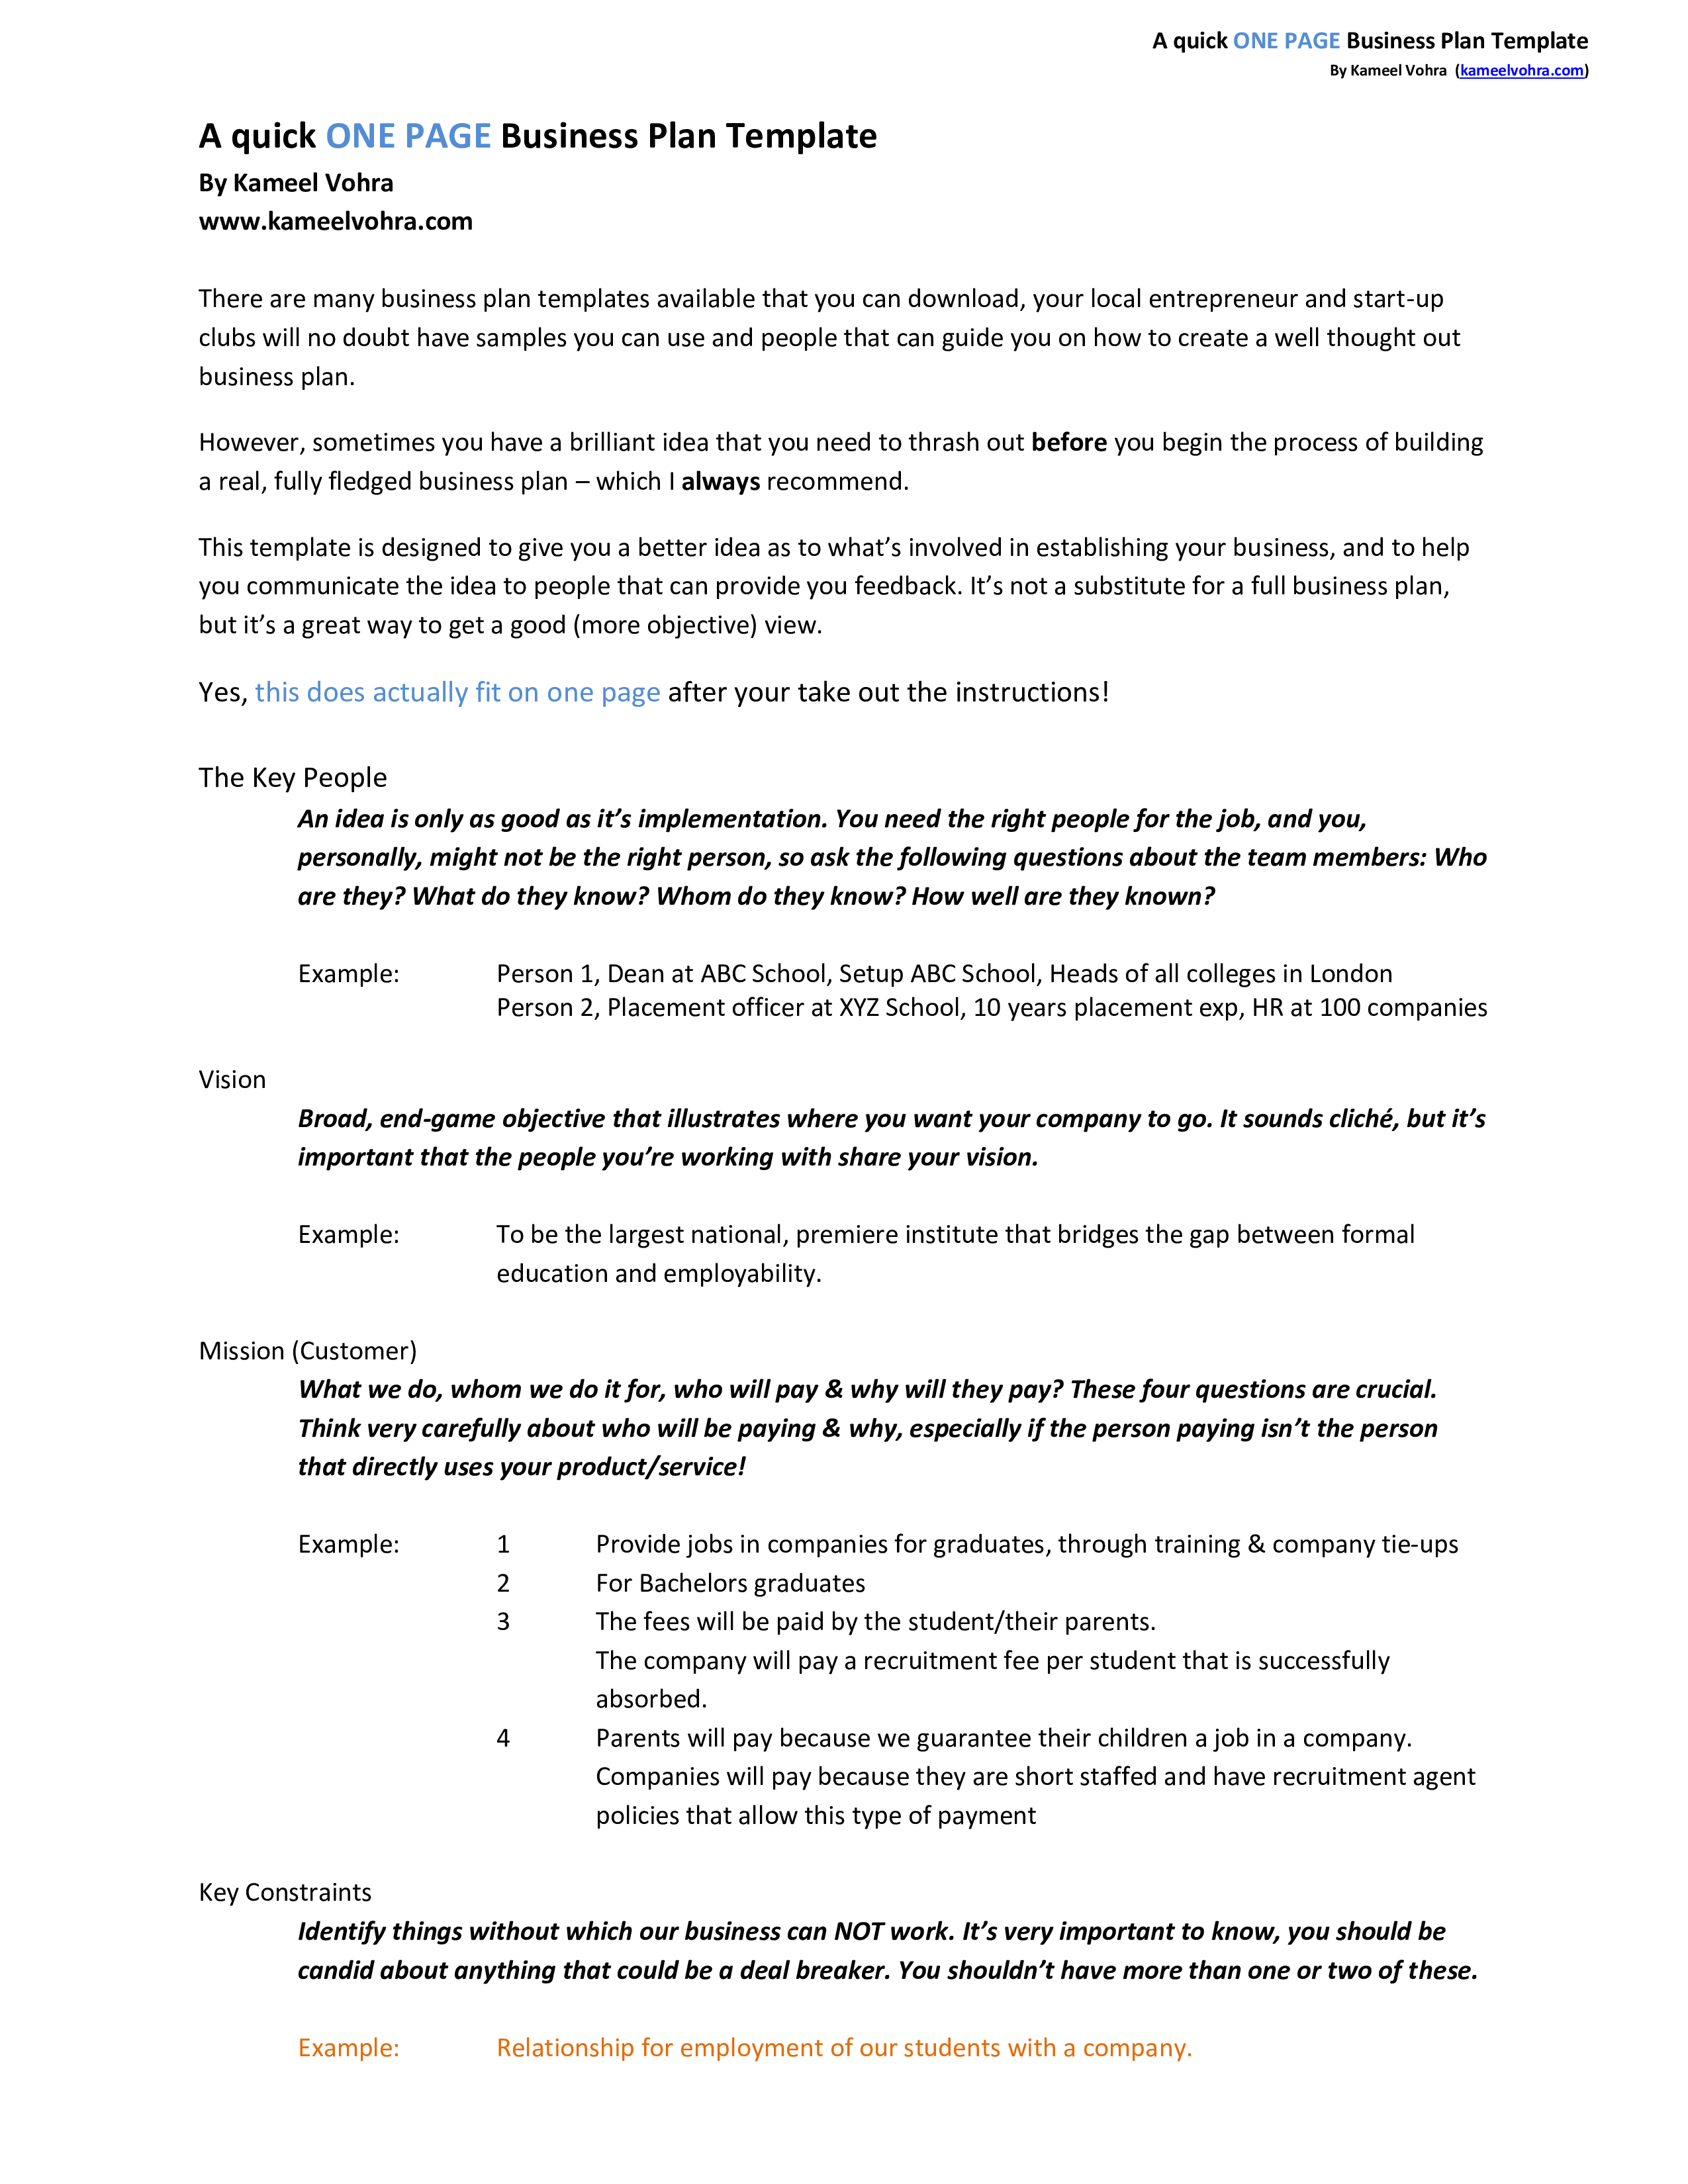 A Quick One Page Business Plan Template - Eloquens Within Consulting Business Plan Template Free